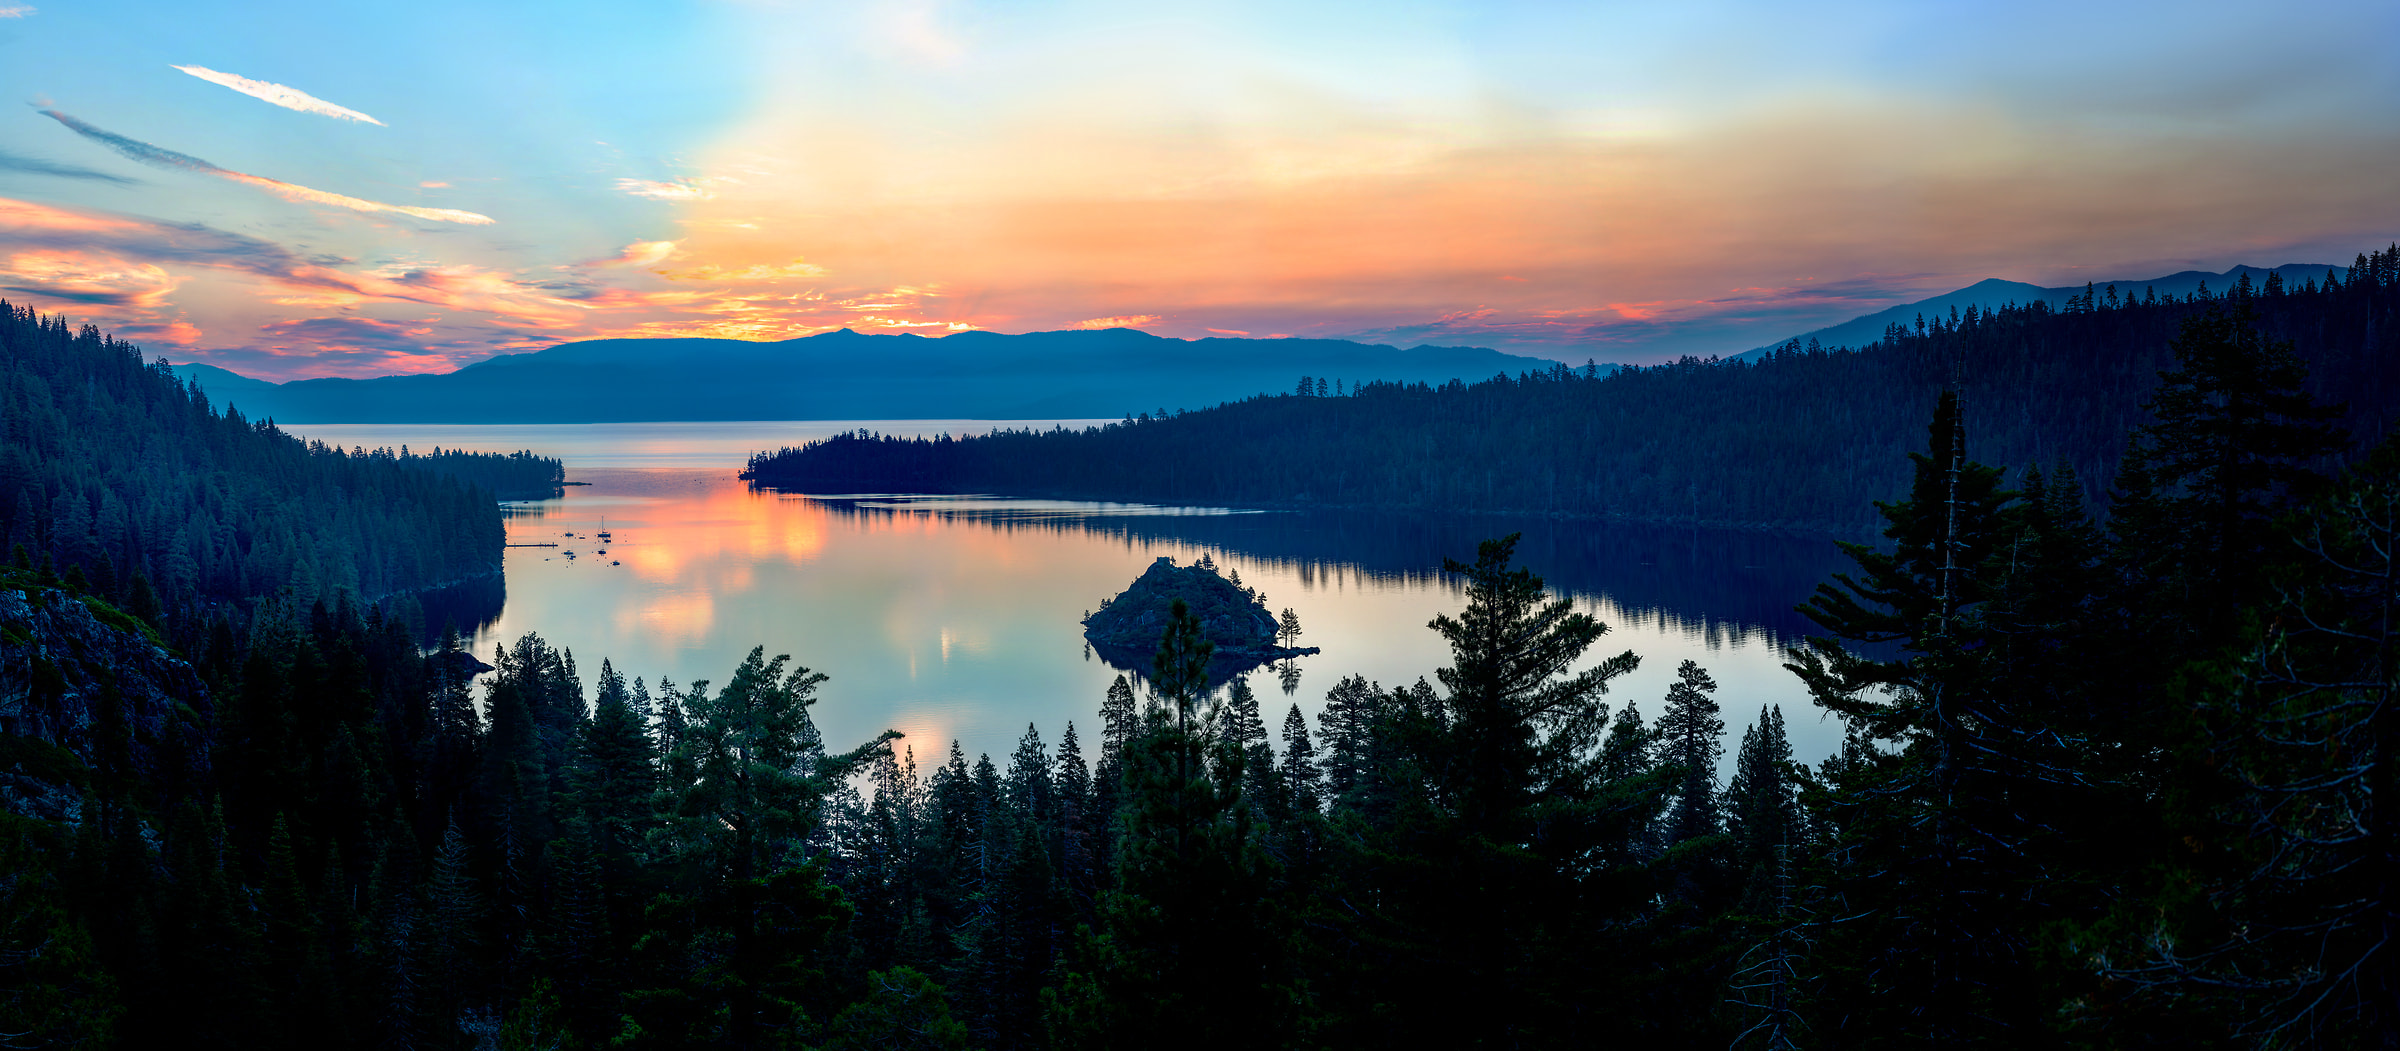 896 megapixels! A very high resolution, large-format VAST photo print of a lake; landscape photograph created by Justin Katz in Emerald Bay, Lake Tahoe, California